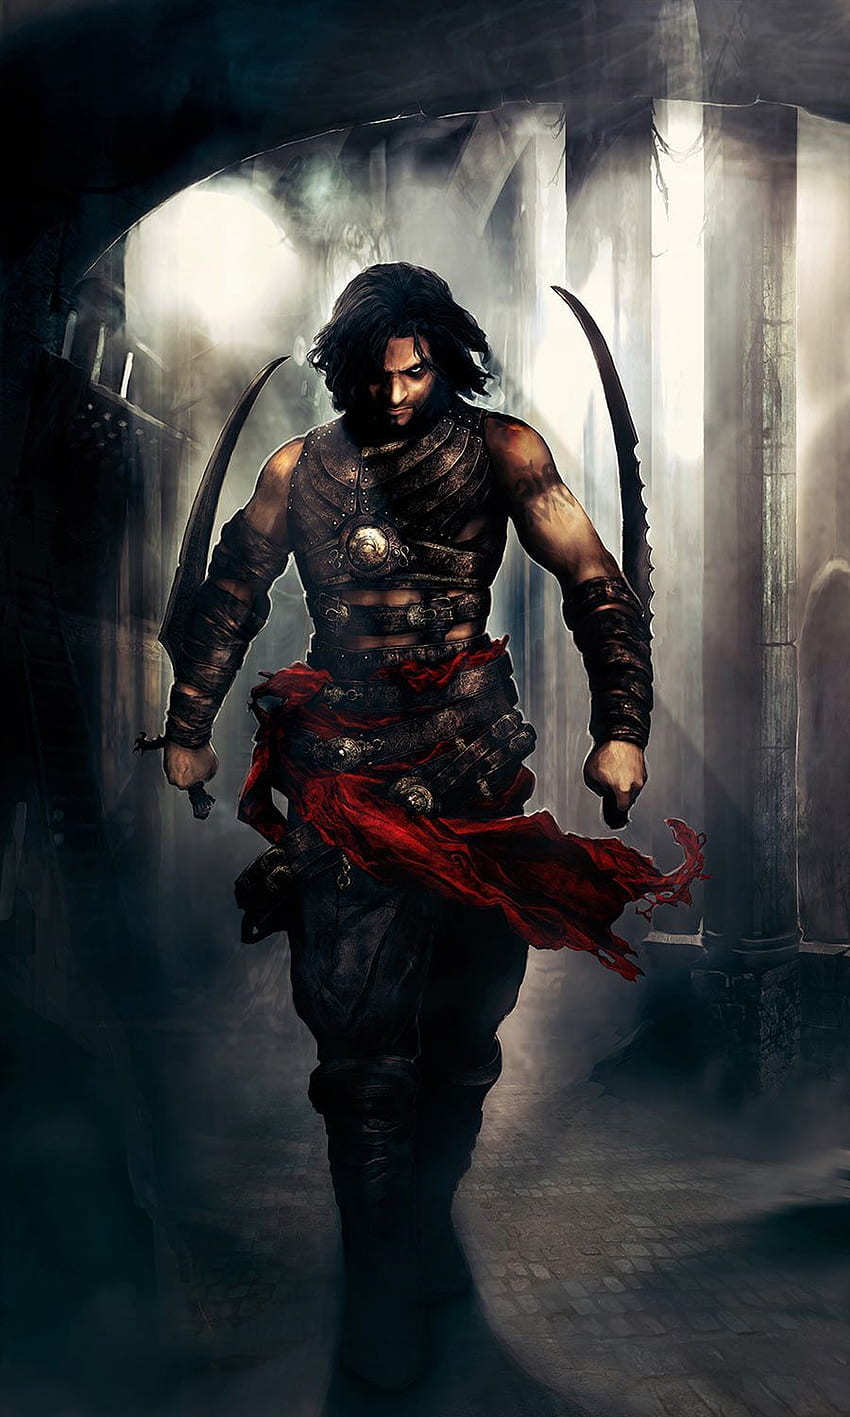 Prince - Characters & Art - Prince of Persia: Warrior Within. Prince of persia, Fantasy warrior, Warriors, Prince of Persia 2 HD phone wallpaper